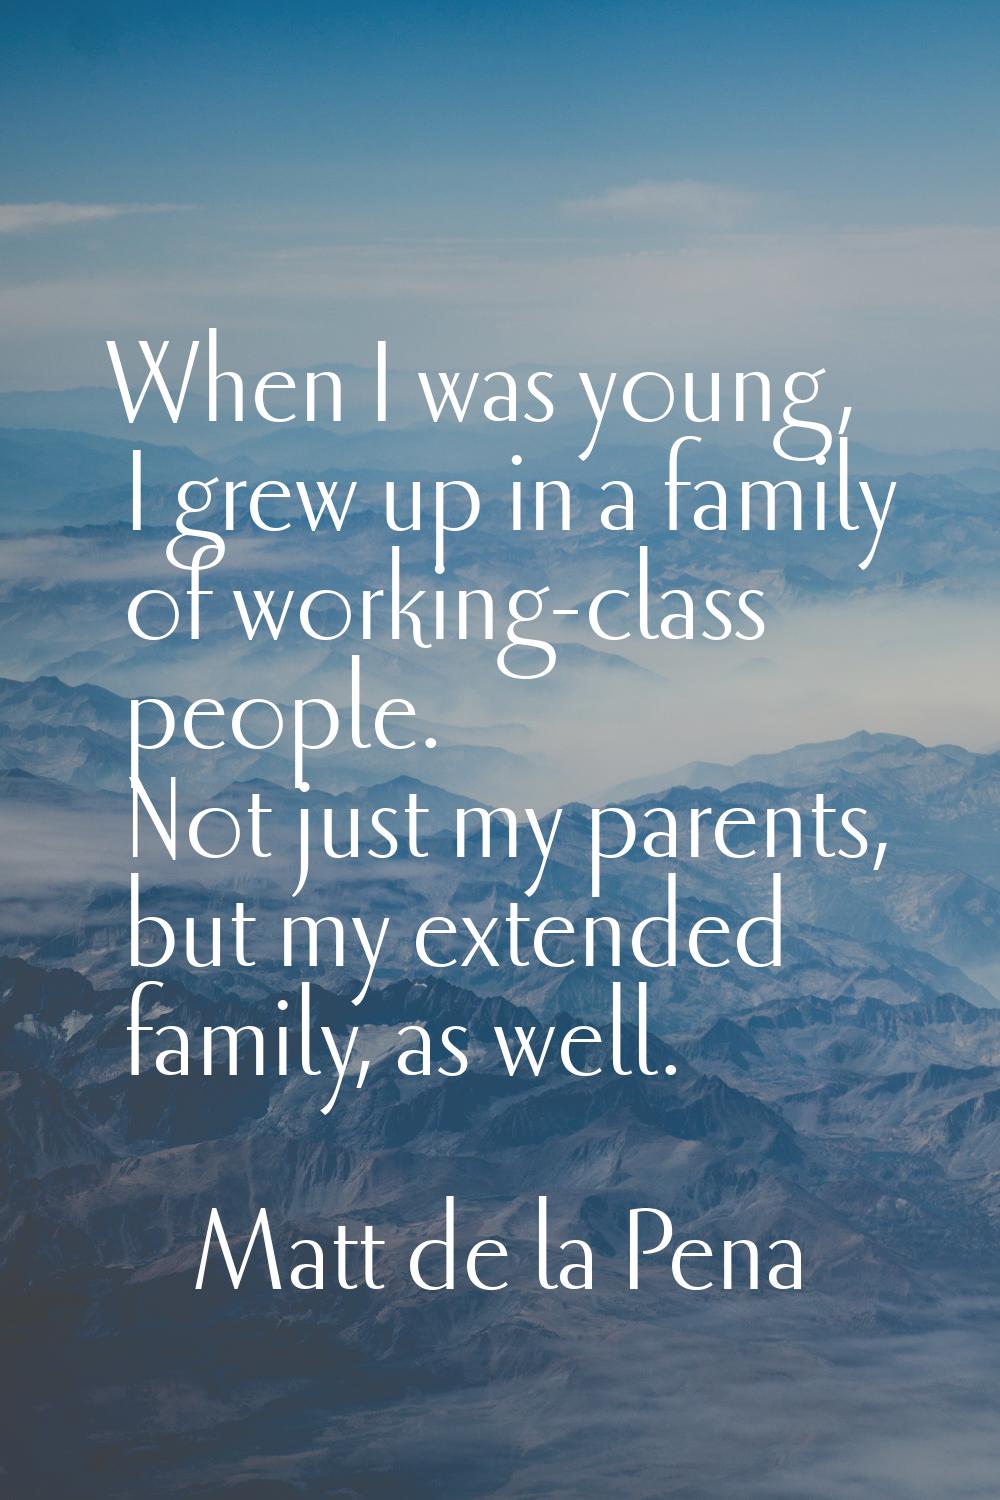 When I was young, I grew up in a family of working-class people. Not just my parents, but my extend